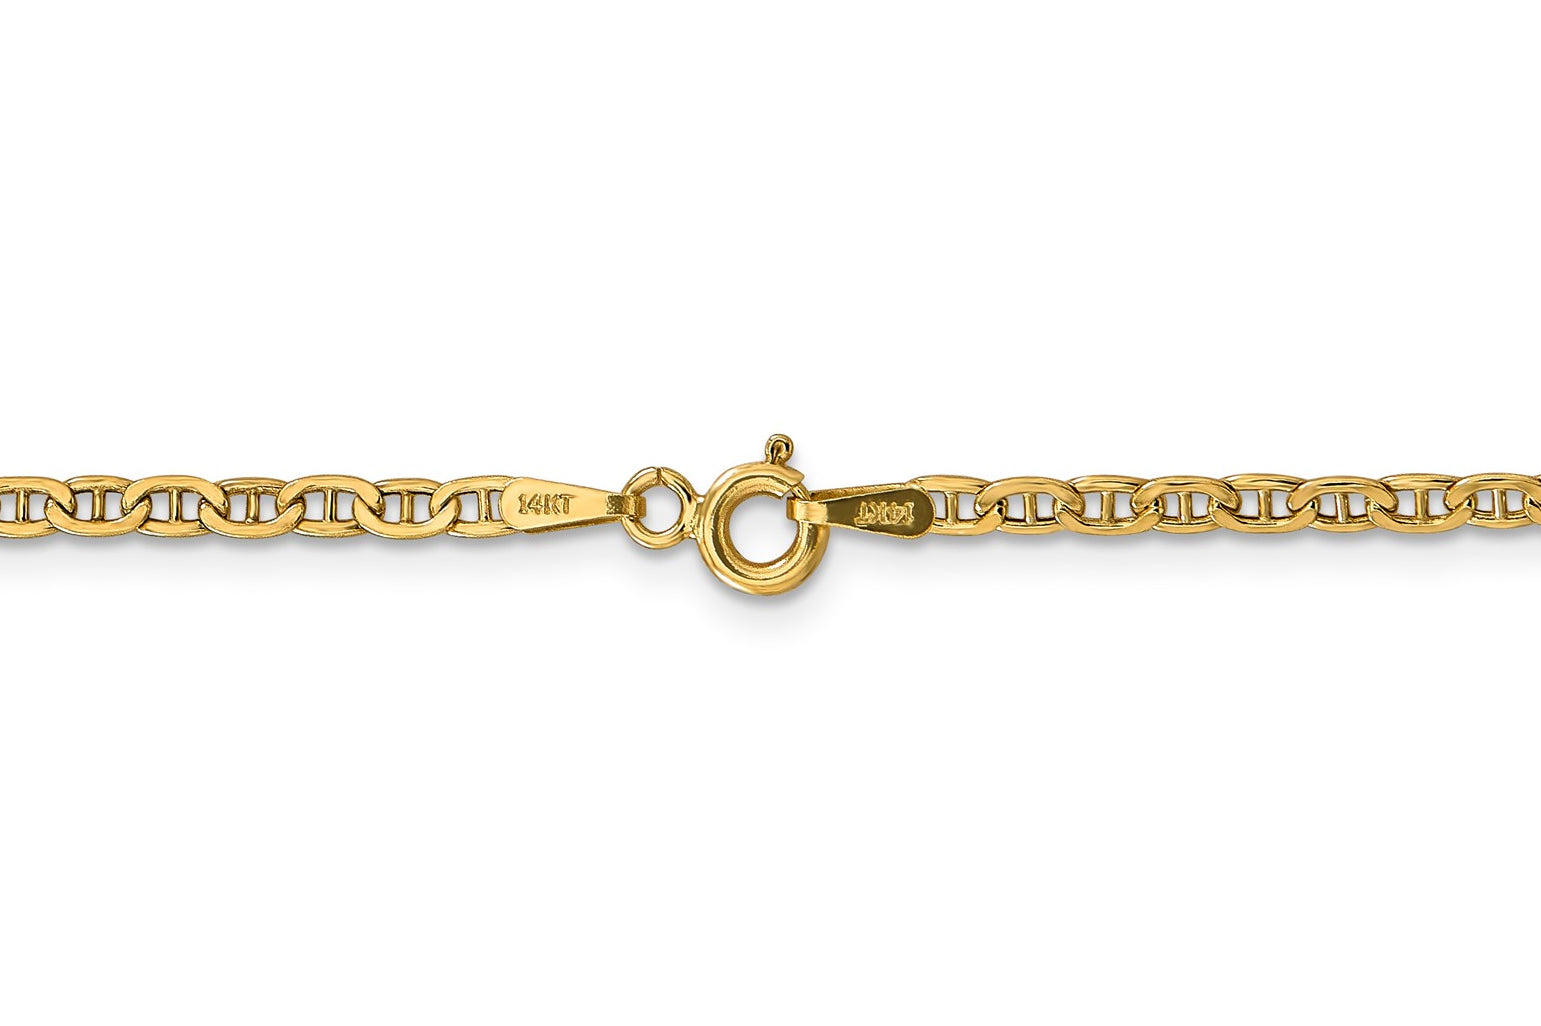 14K Gold Semi-Solid Anchor Chain - 2.40mm